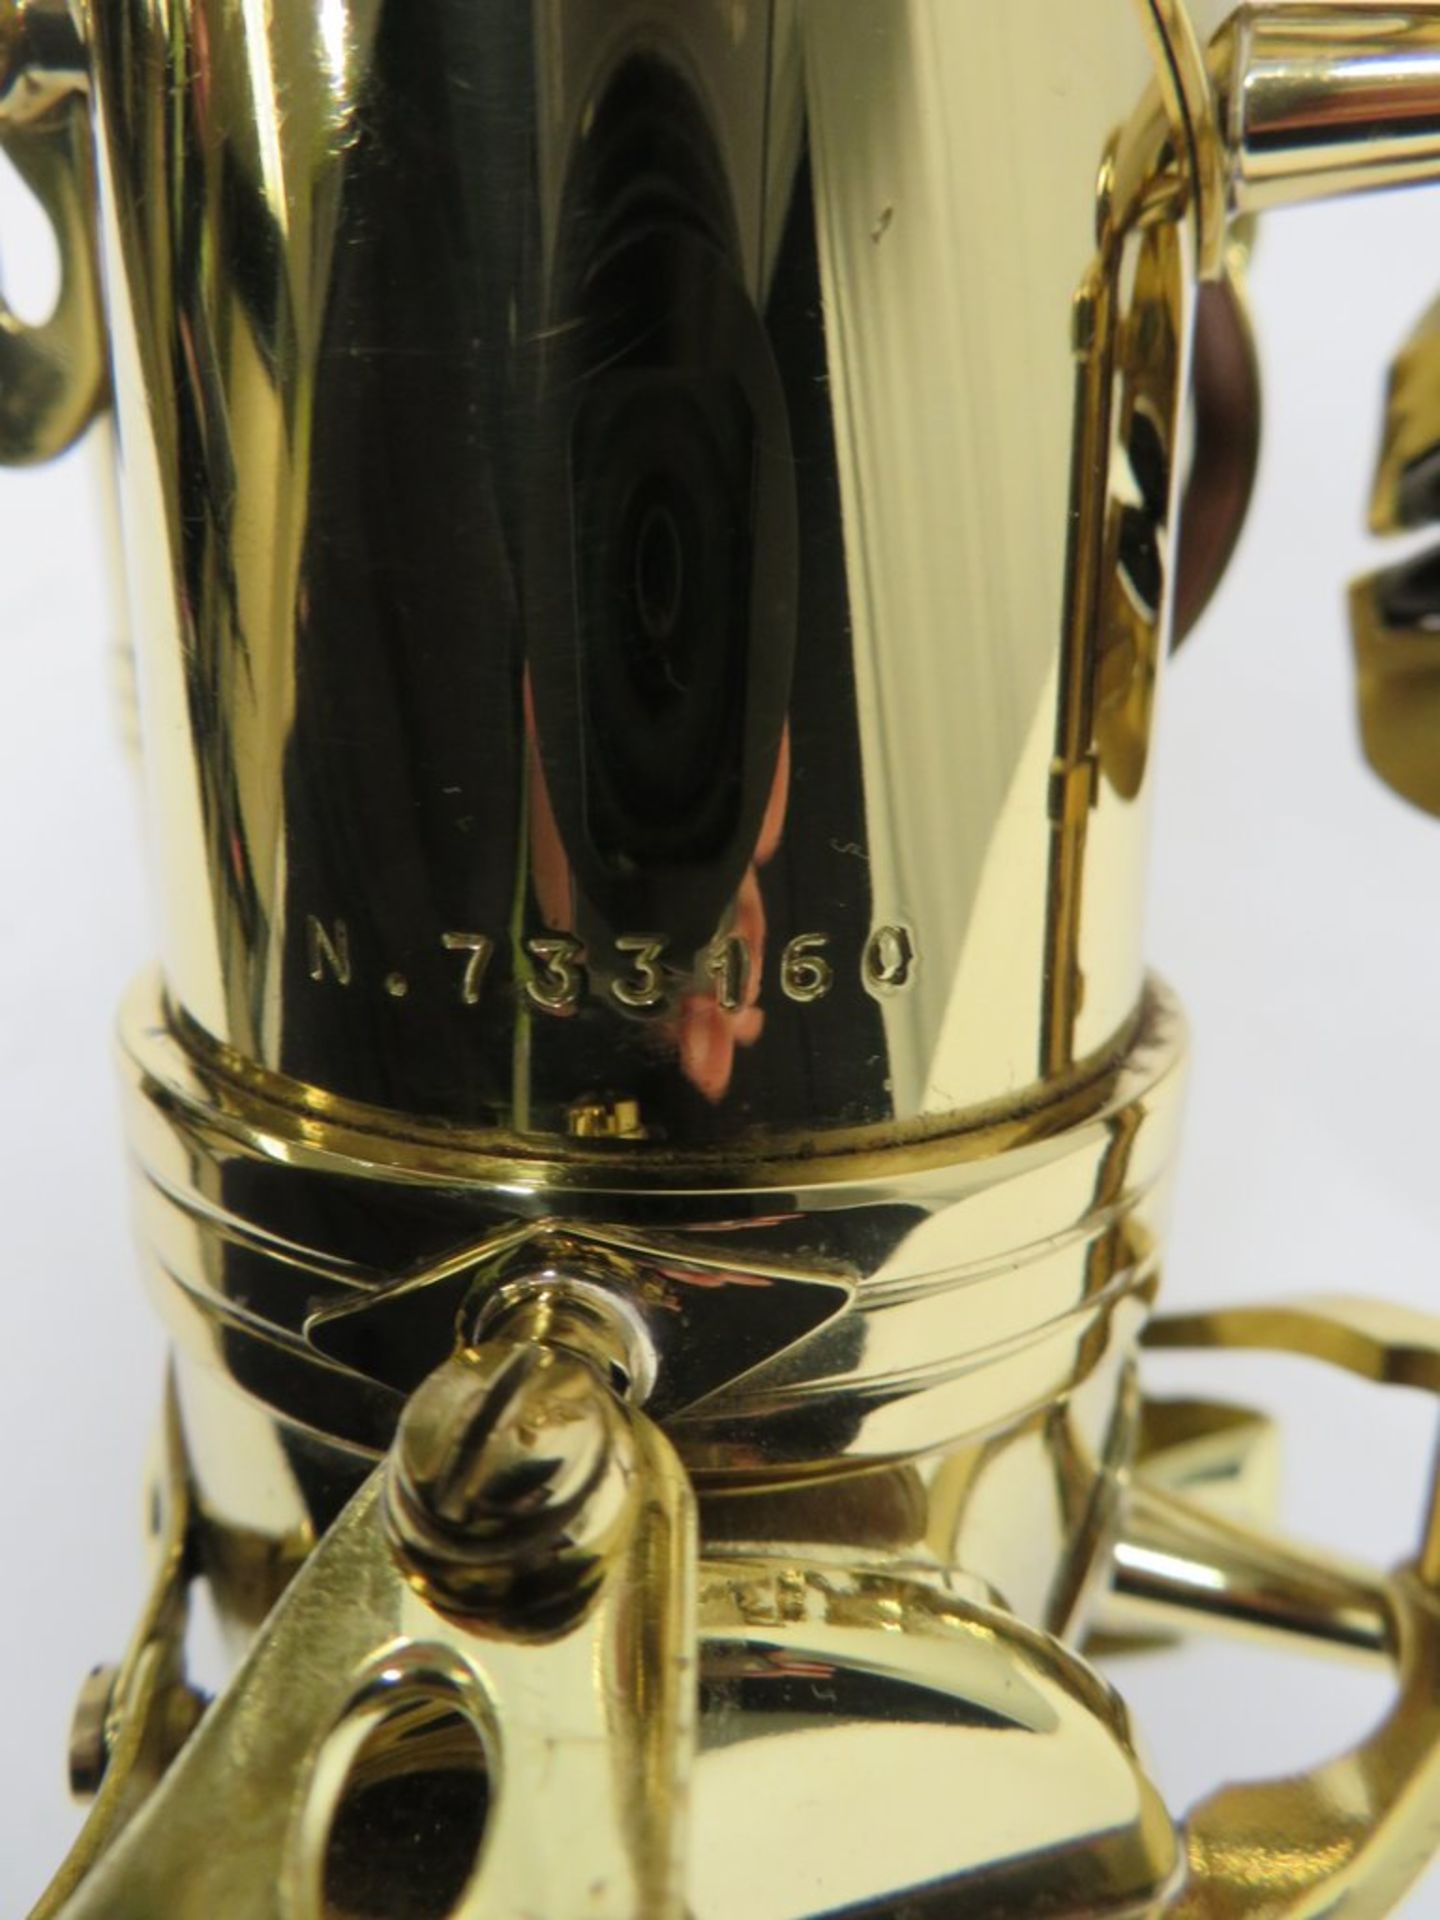 Henri Selmer Super Action 80 Series 3 tenor saxophone with case. Serial number: N.733160. - Image 12 of 14